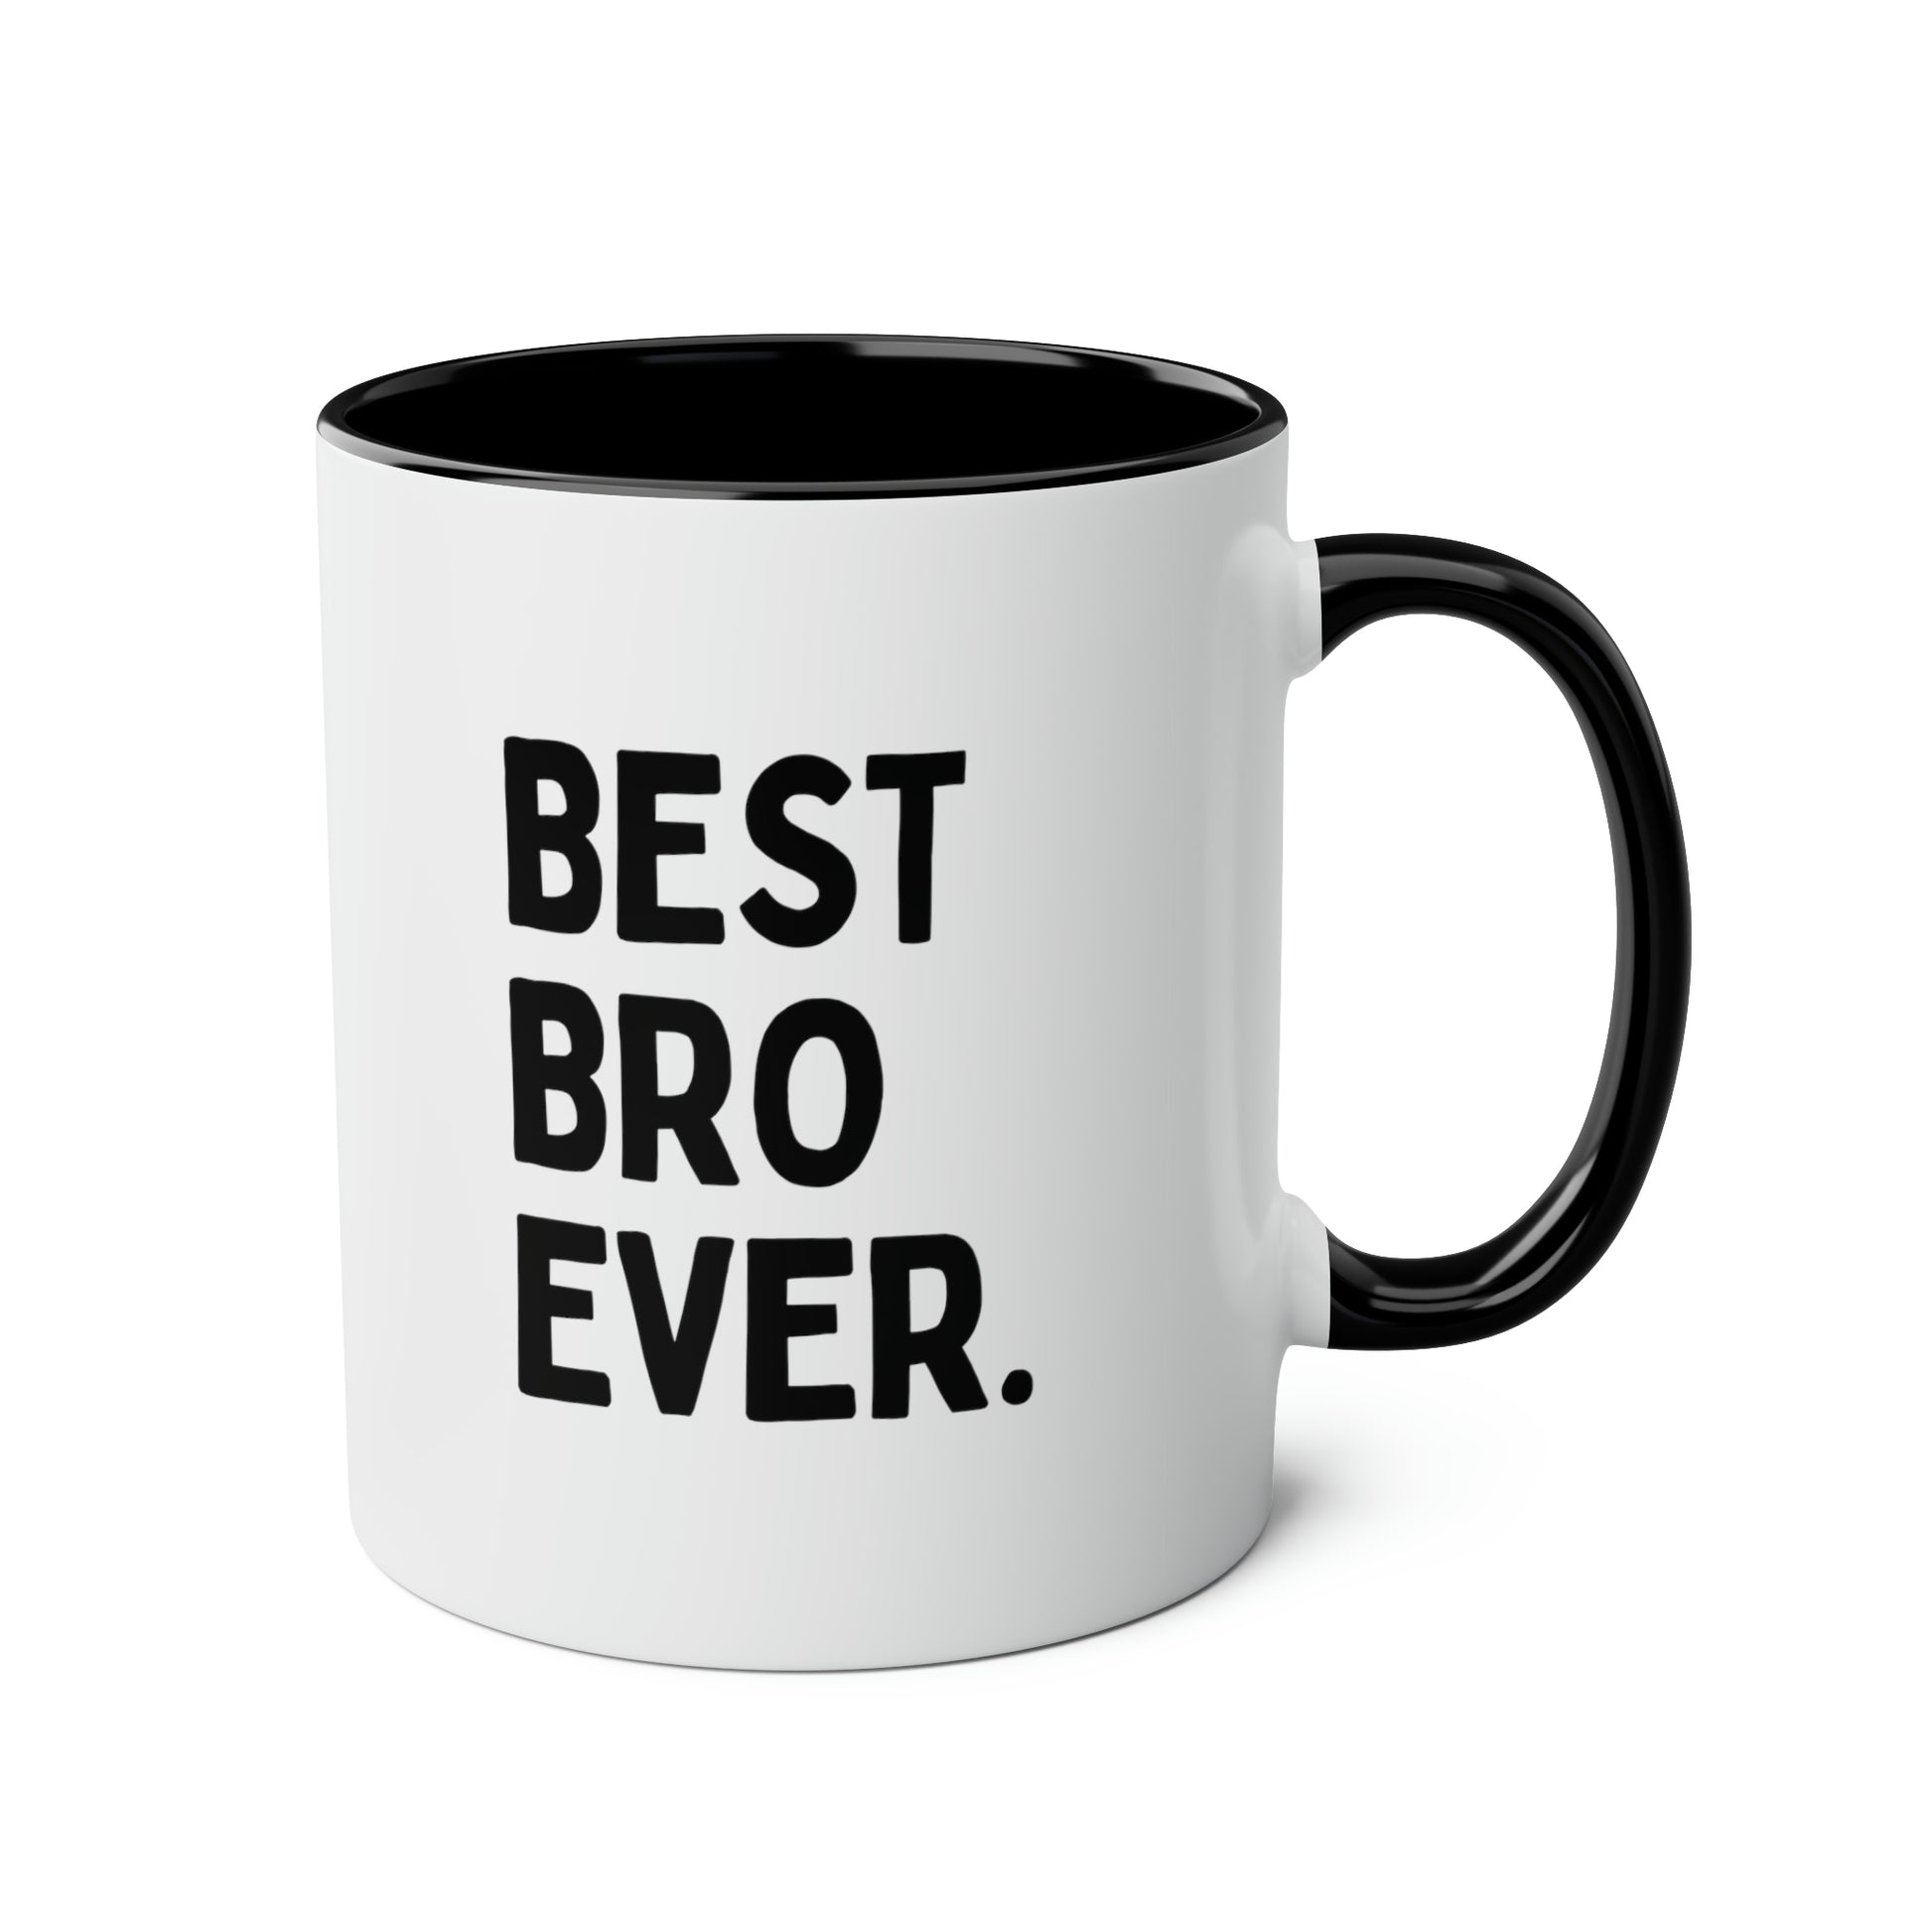 Best Bro Ever 11oz white with black accent funny large coffee mug gift for brother best friend husband men fathers day bff dad waveywares wavey wares wavywares wavy wares